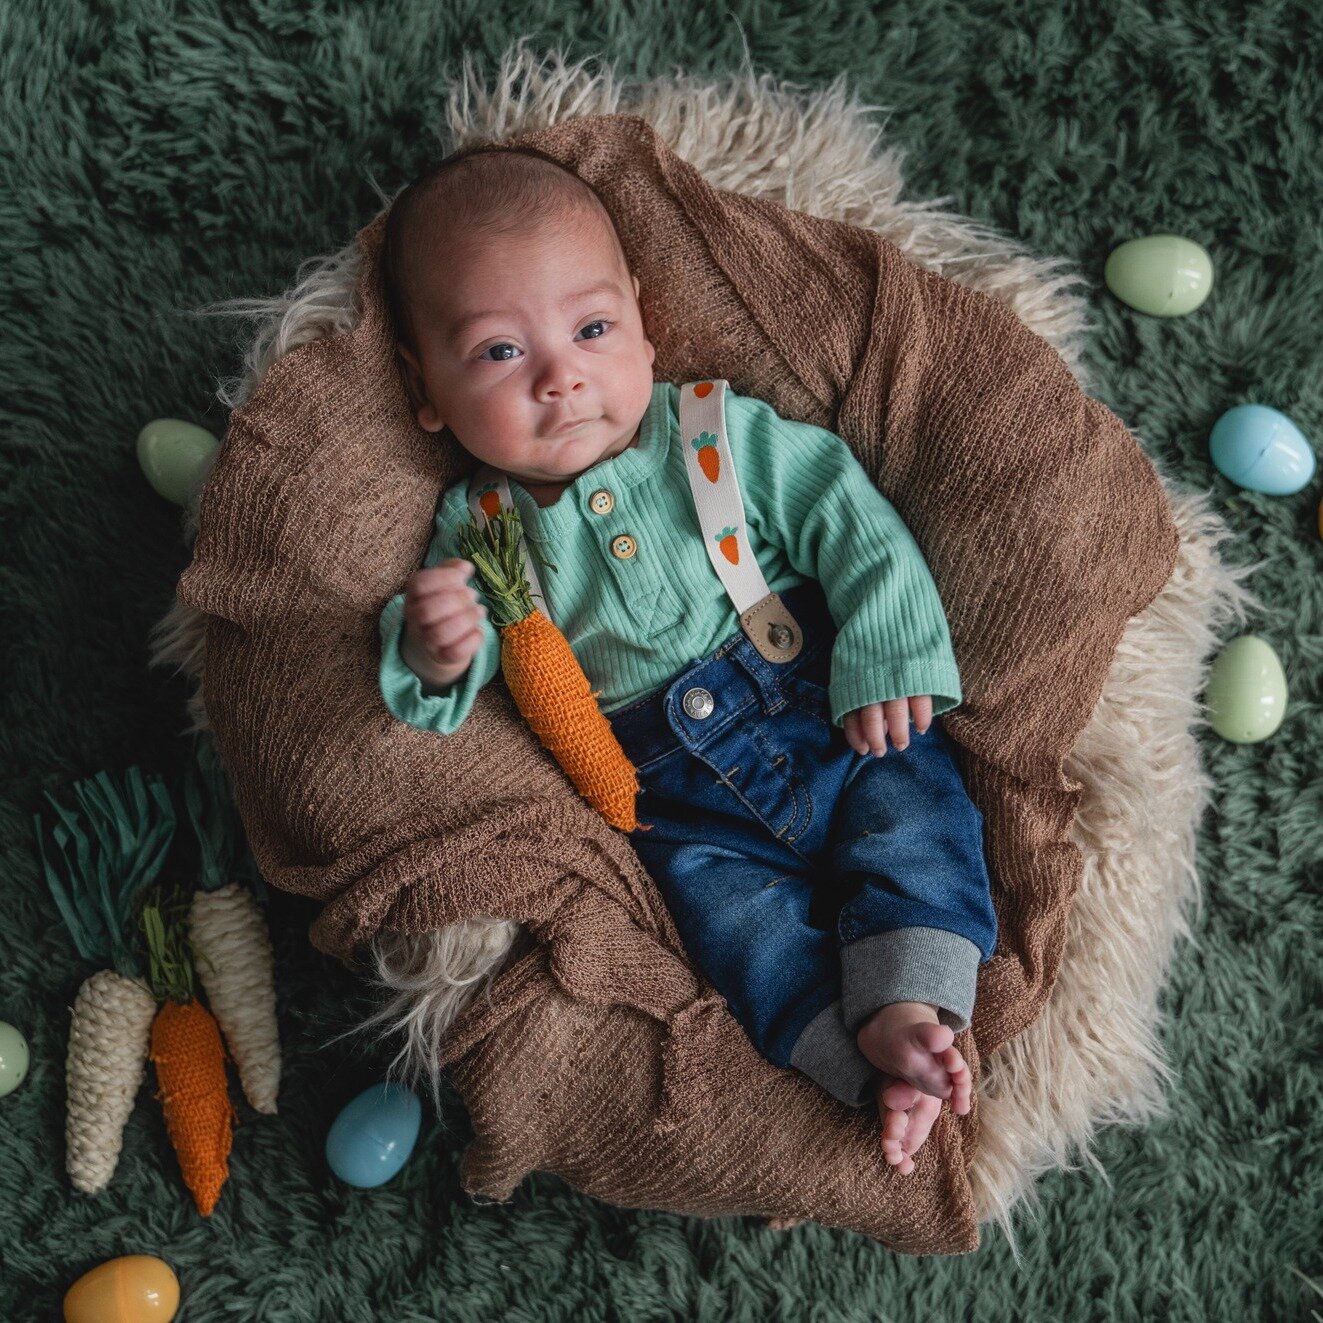 Still over here swooning over this little bunny's newborn Easter shoot 😍